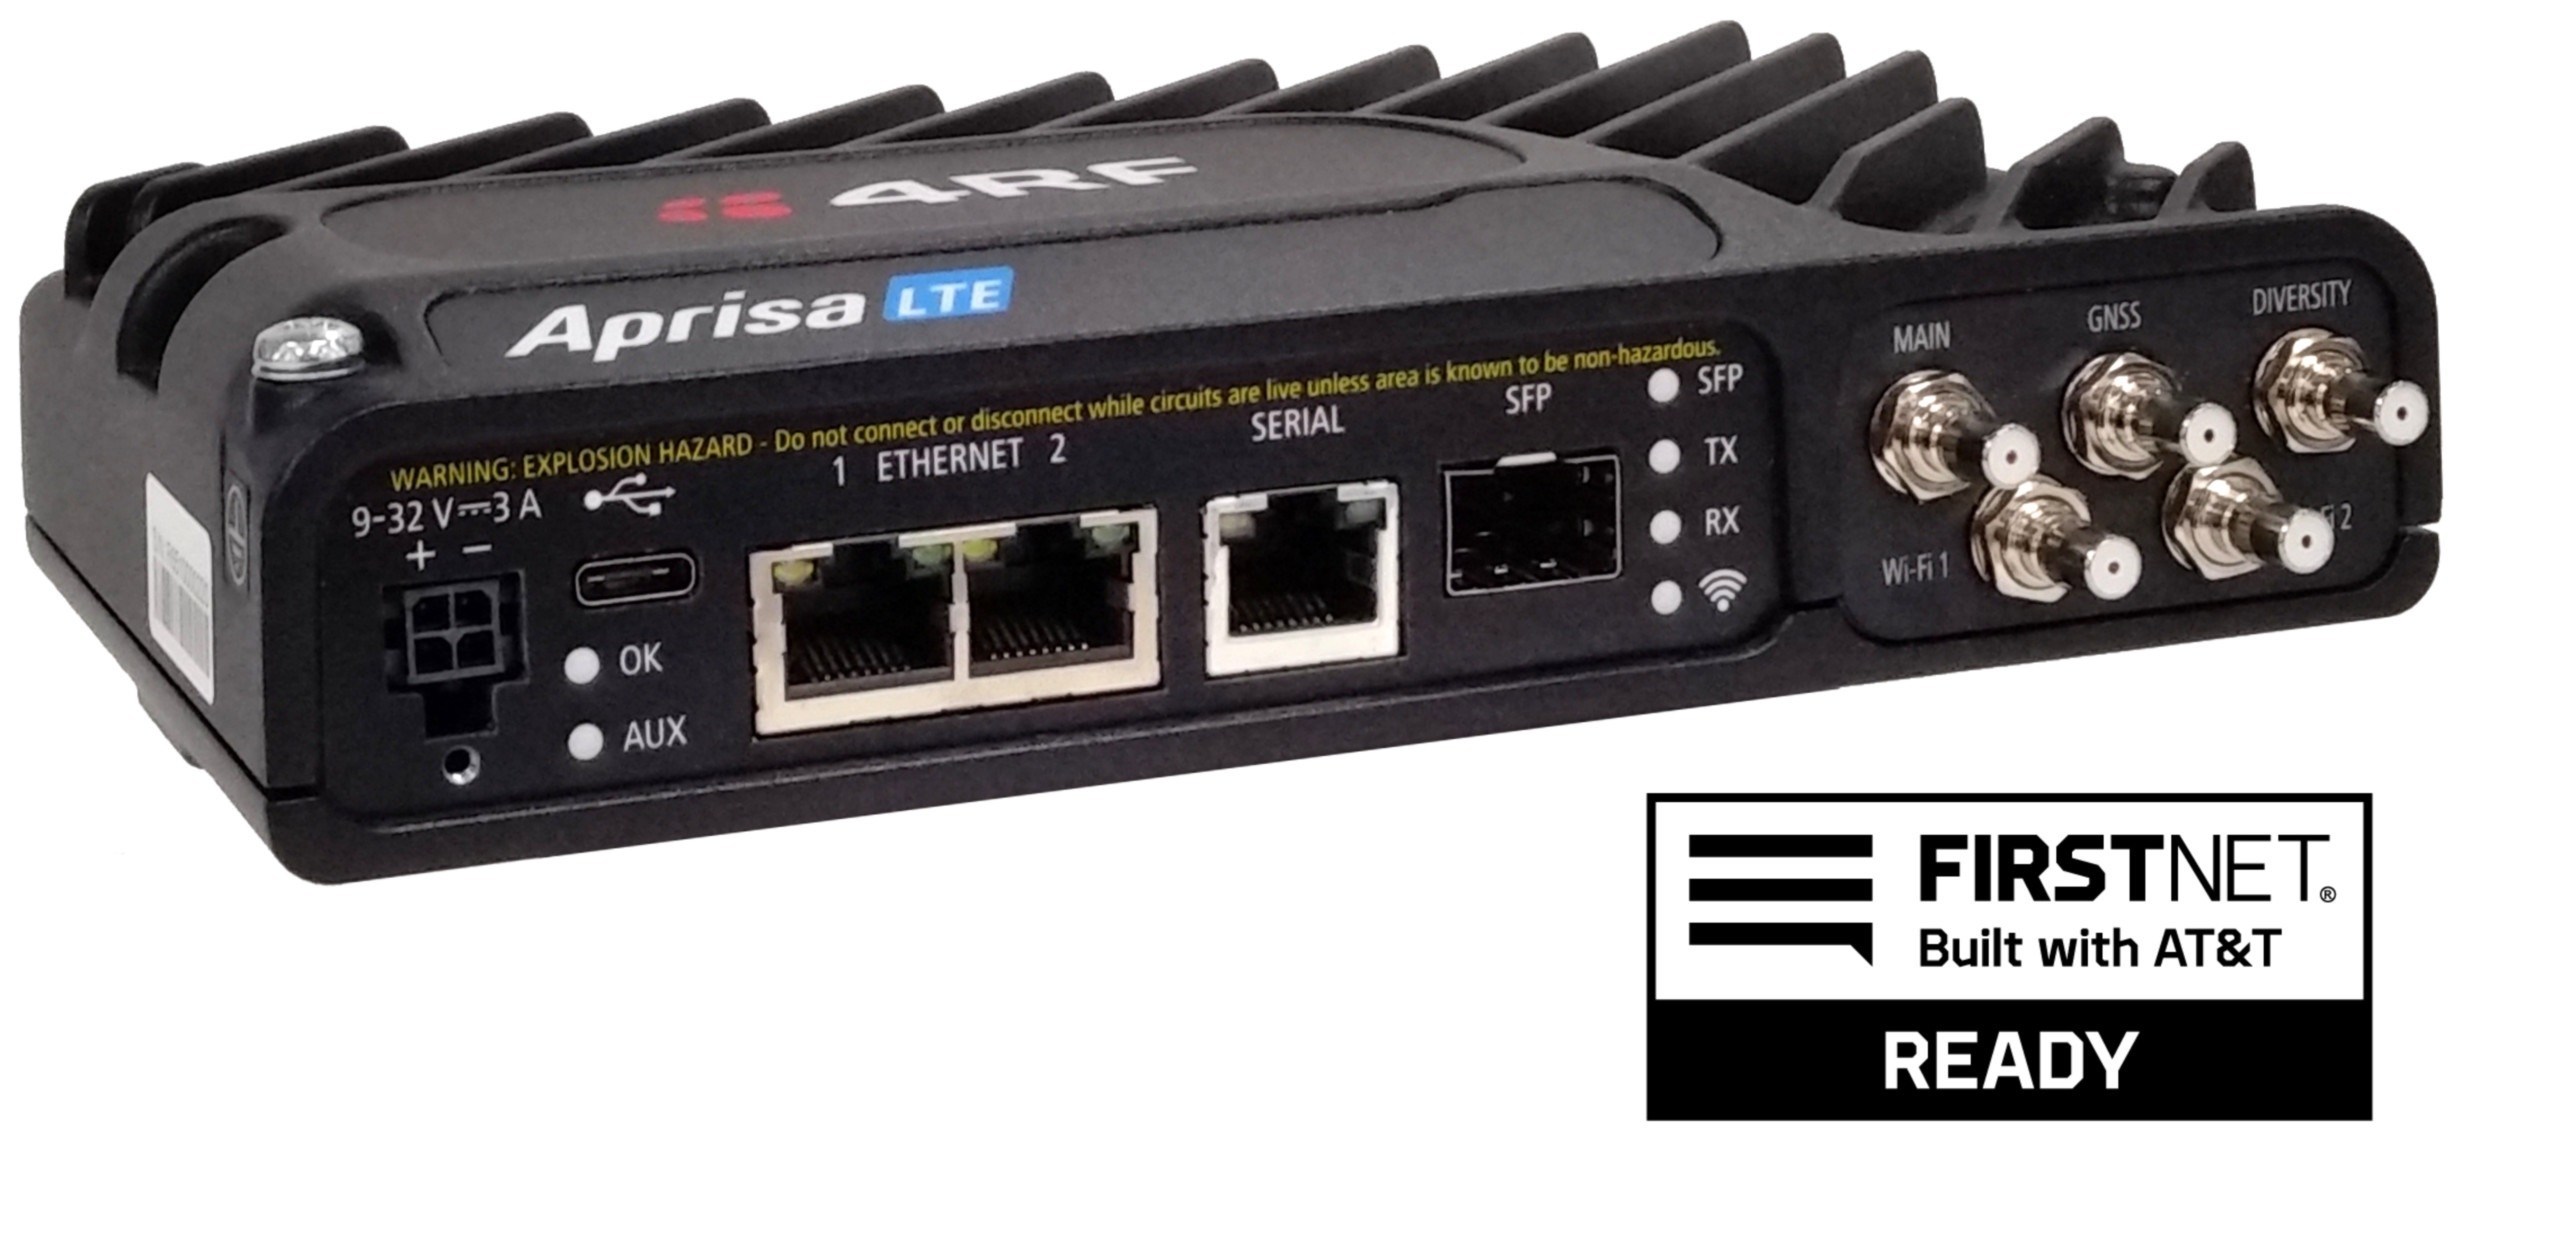 4RF Delivers FirstNet Ready® Aprisa LTE Router for Public Safety